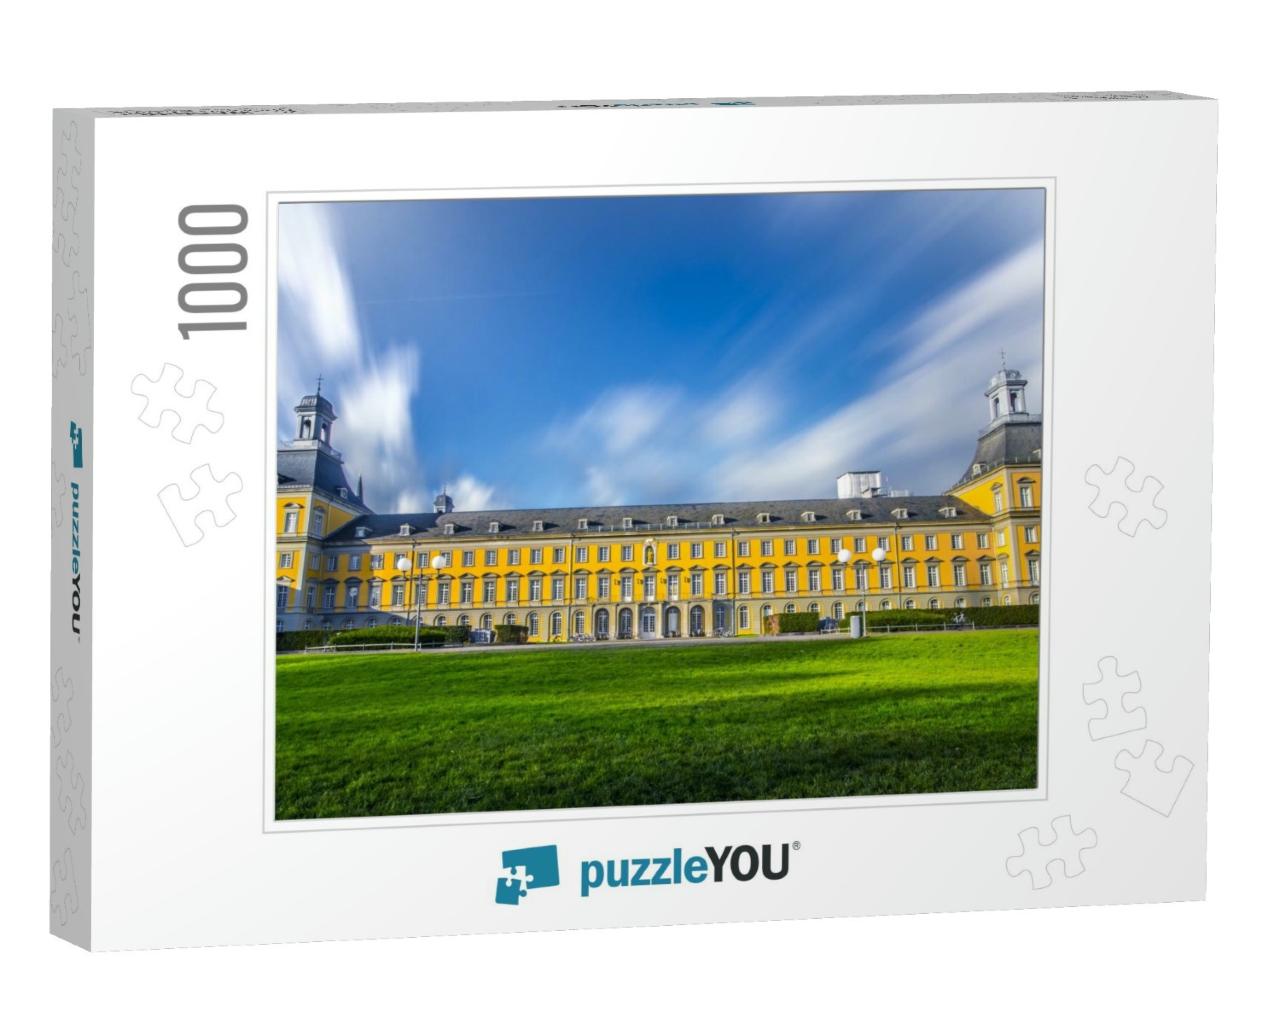 A Low Angle Shot of the Beautiful University of Bonn in G... Jigsaw Puzzle with 1000 pieces